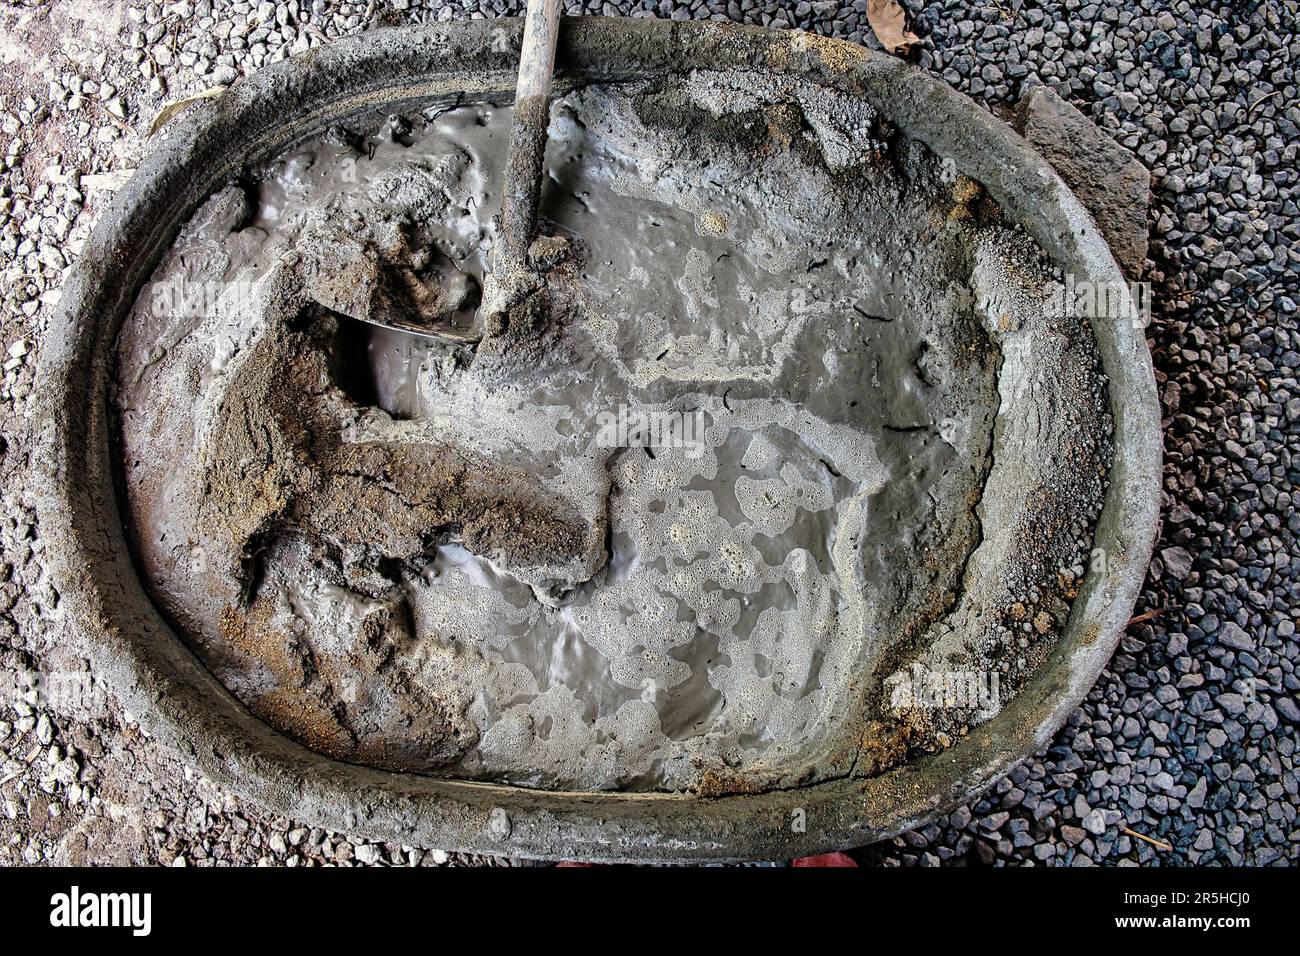 Mixing sand, cement, gravel and water in a tub to make concrete at a building site in Thailand Stock Photo